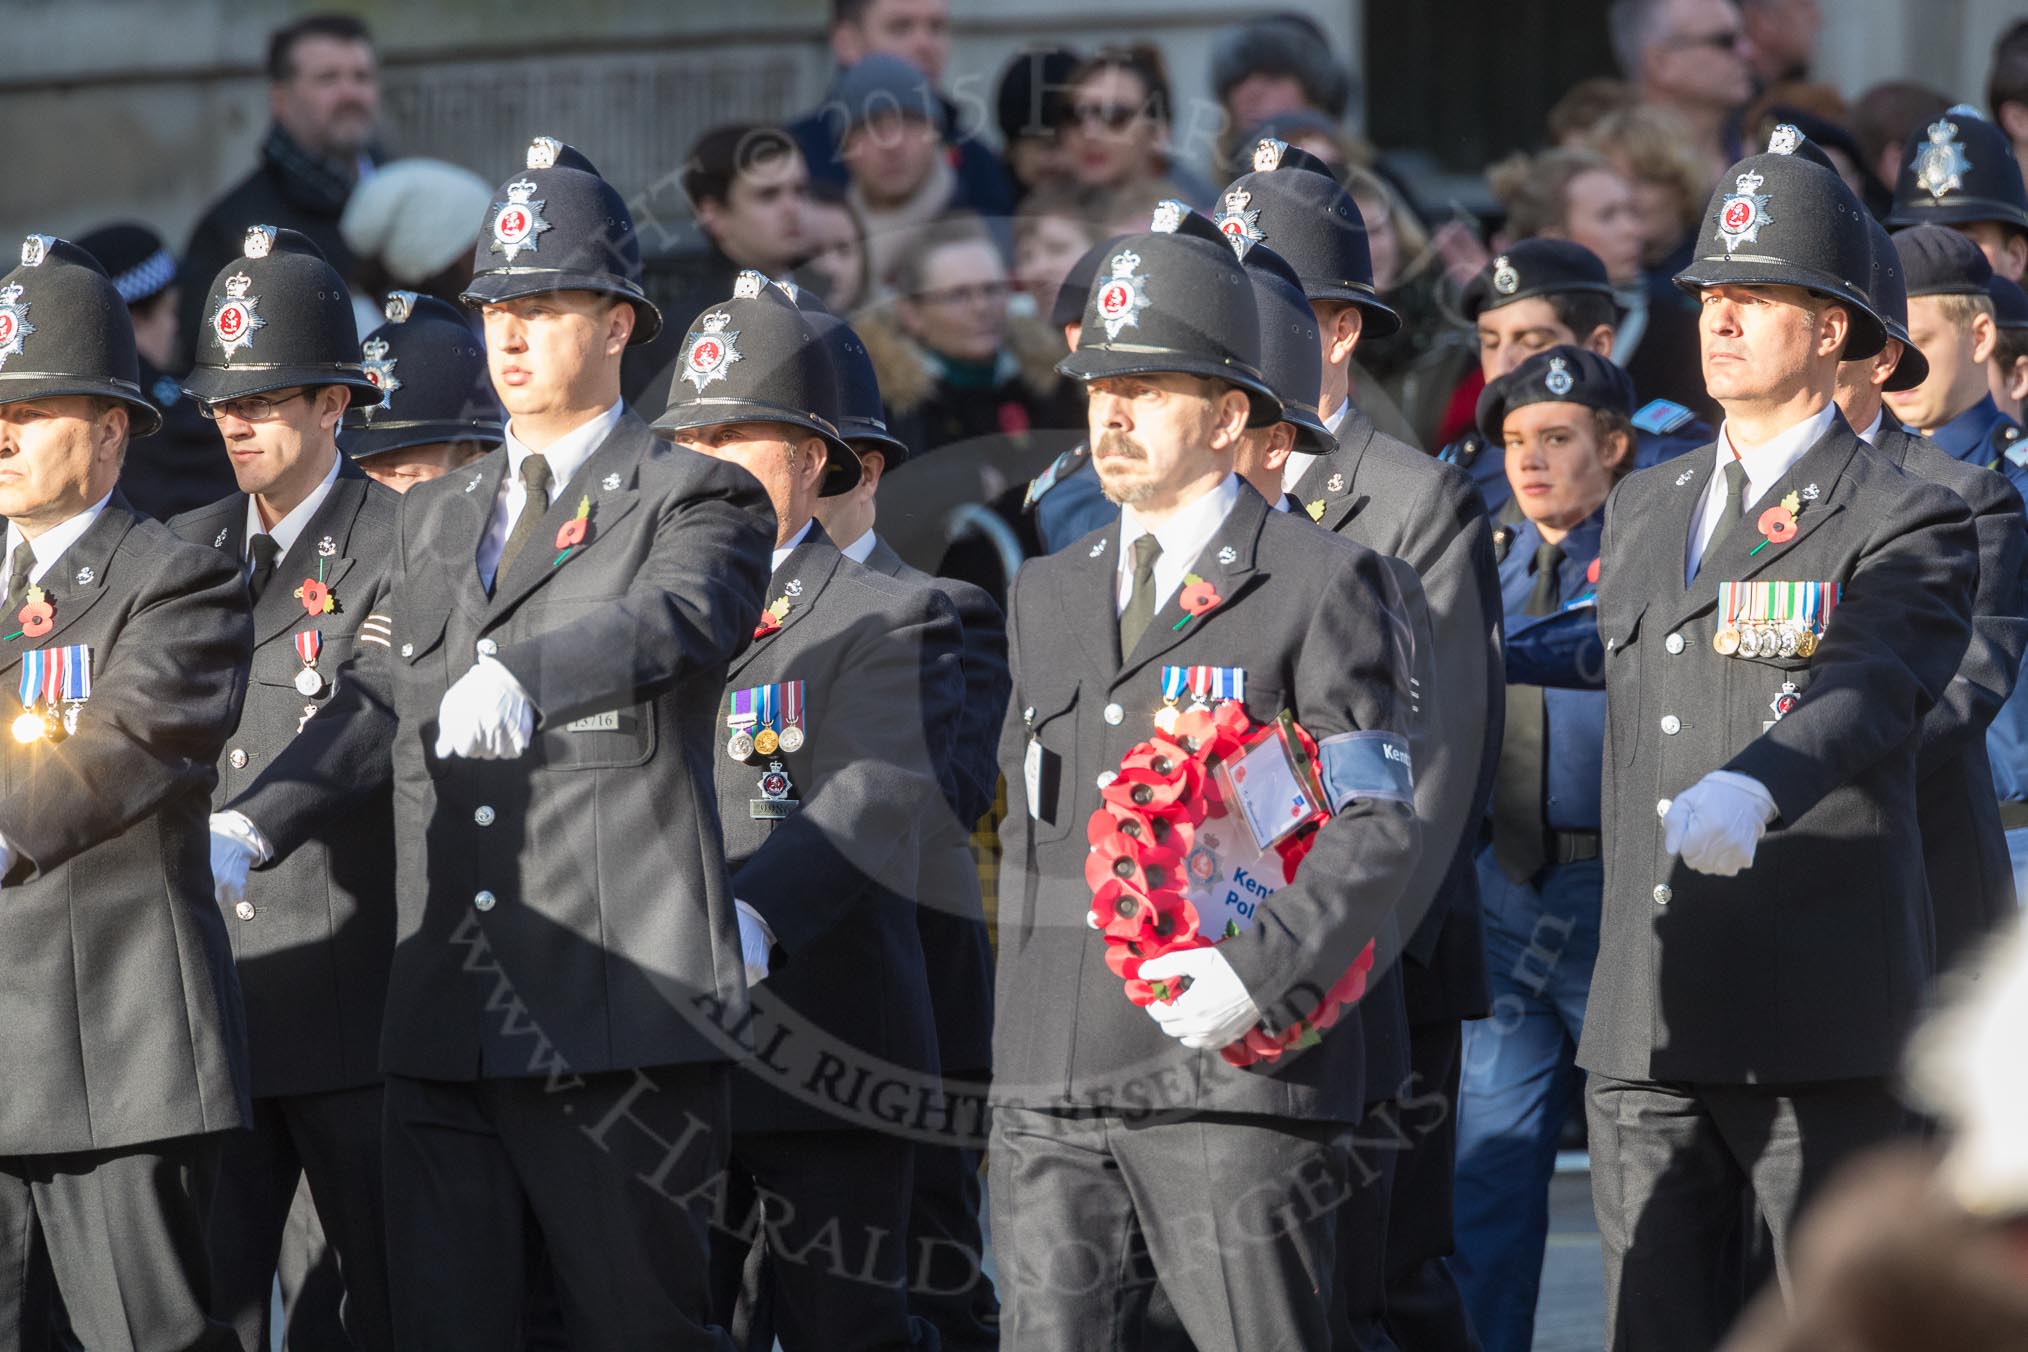 March Past, Remembrance Sunday at the Cenotaph 2016: M39 Kent Police.
Cenotaph, Whitehall, London SW1,
London,
Greater London,
United Kingdom,
on 13 November 2016 at 13:19, image #2934